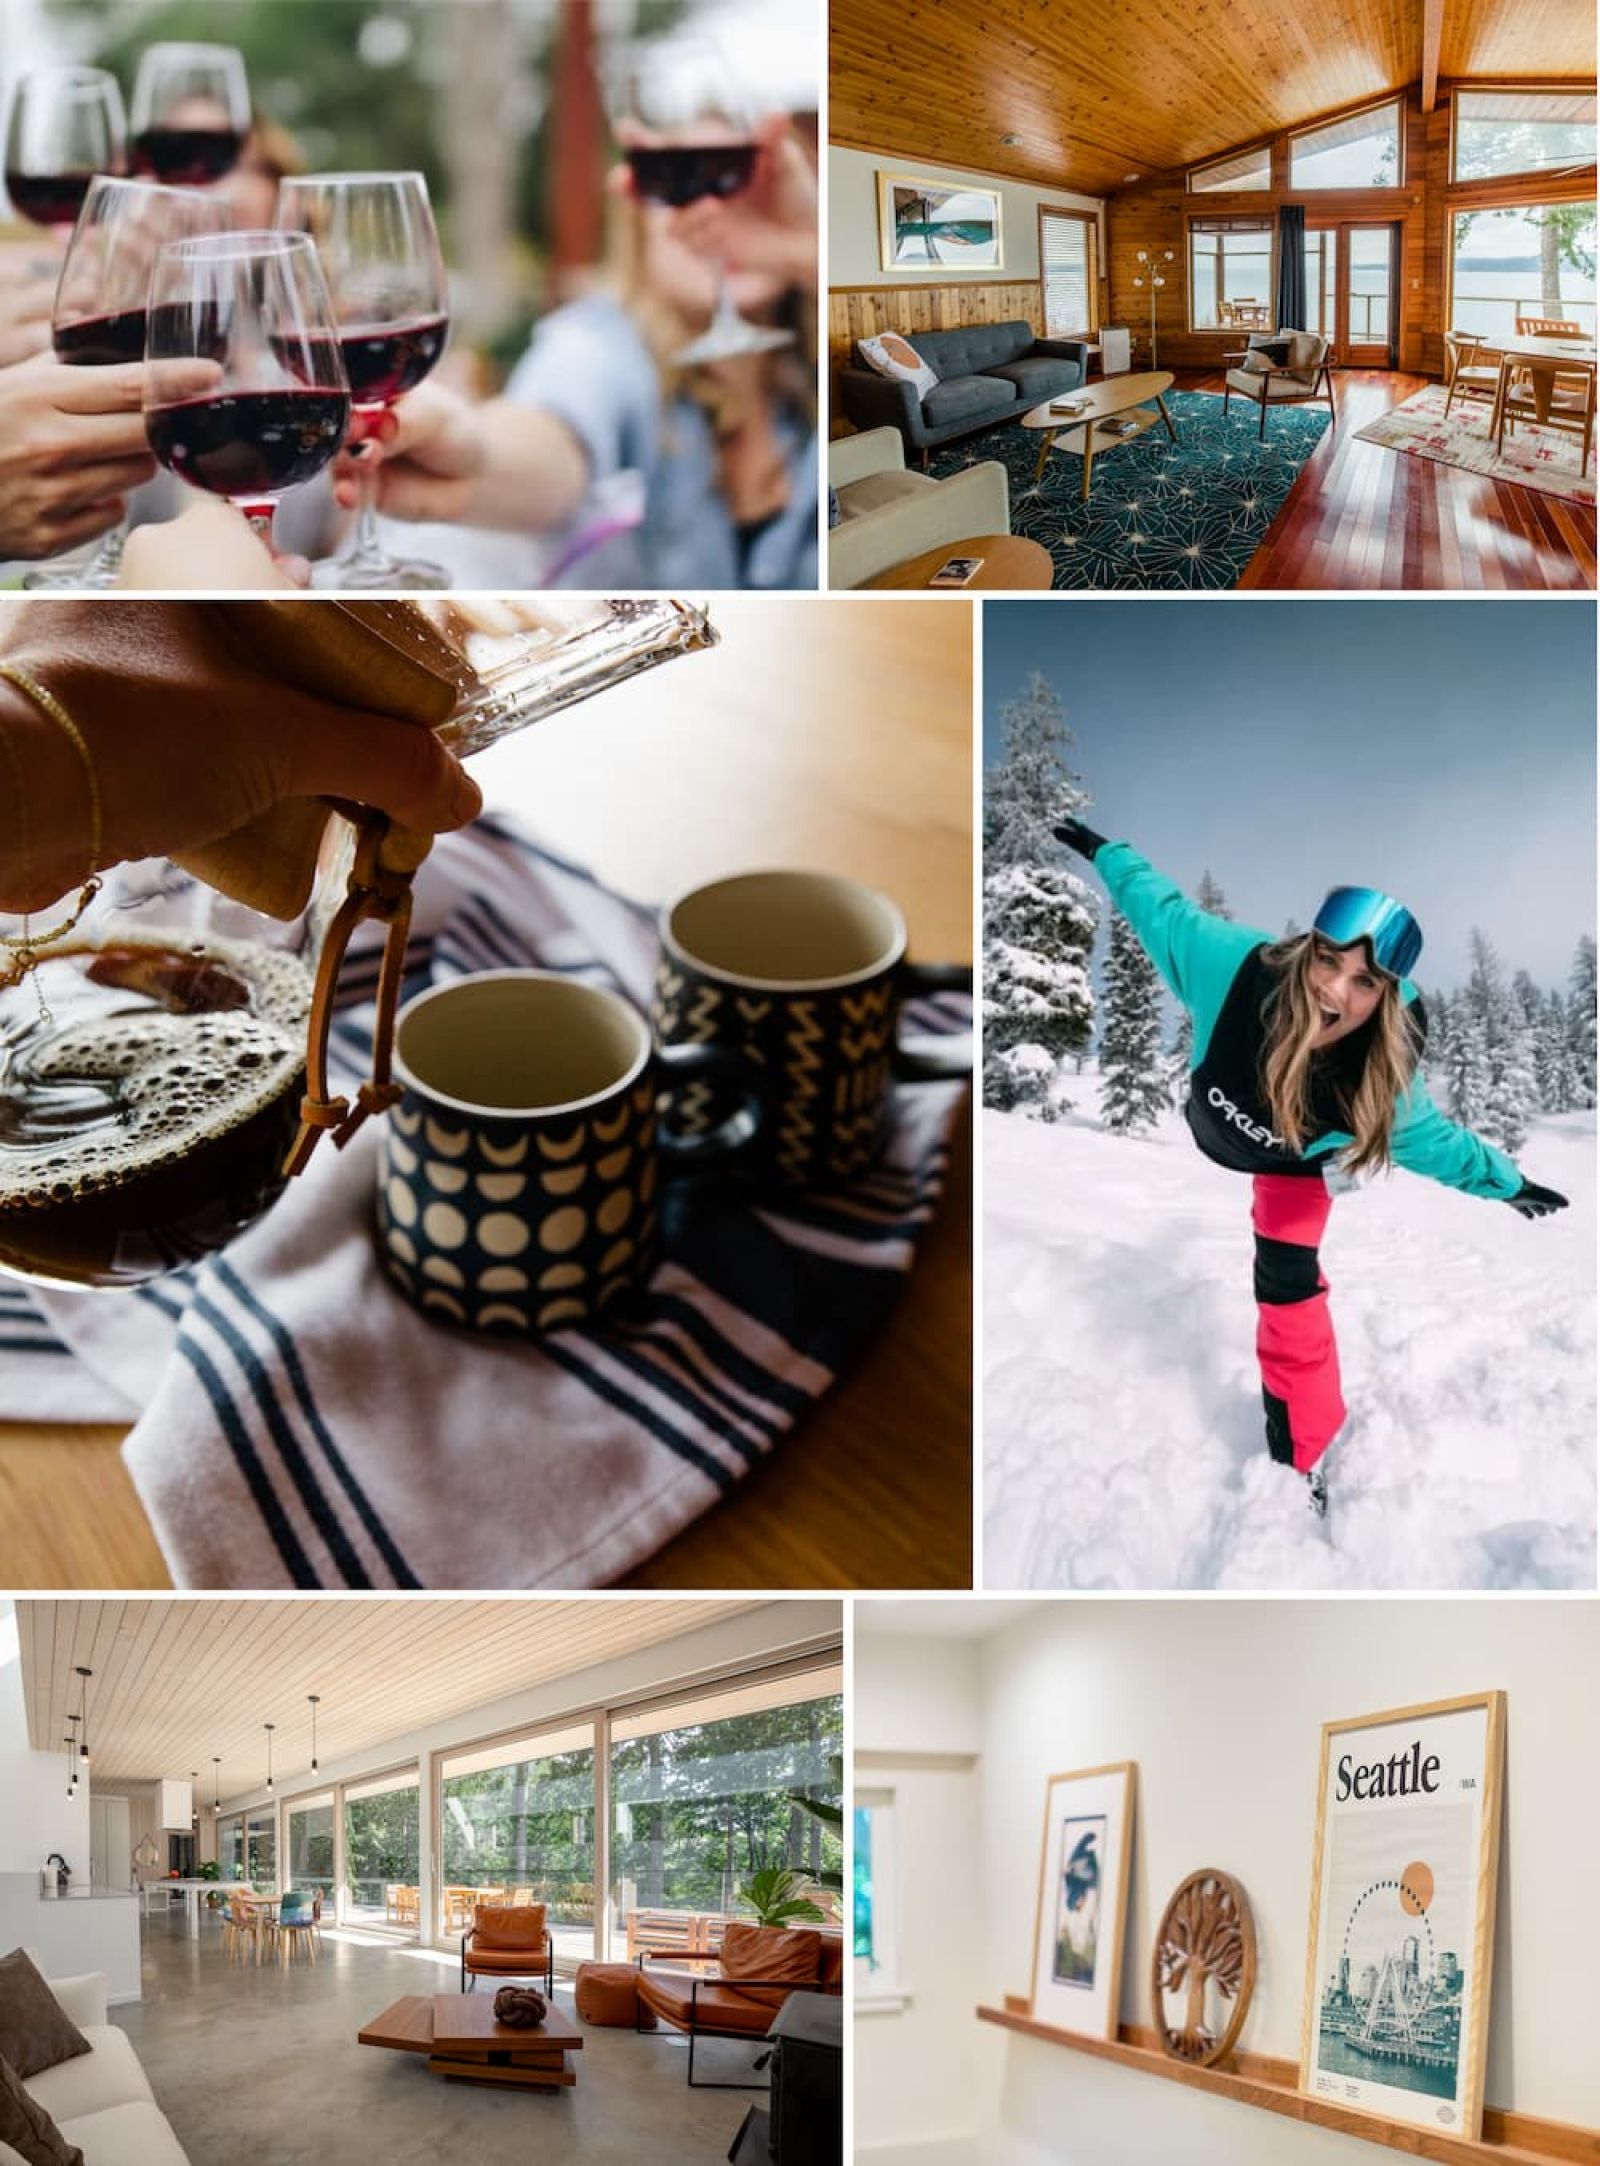 Collage of images showing Seattle rental properties and activities for vacations